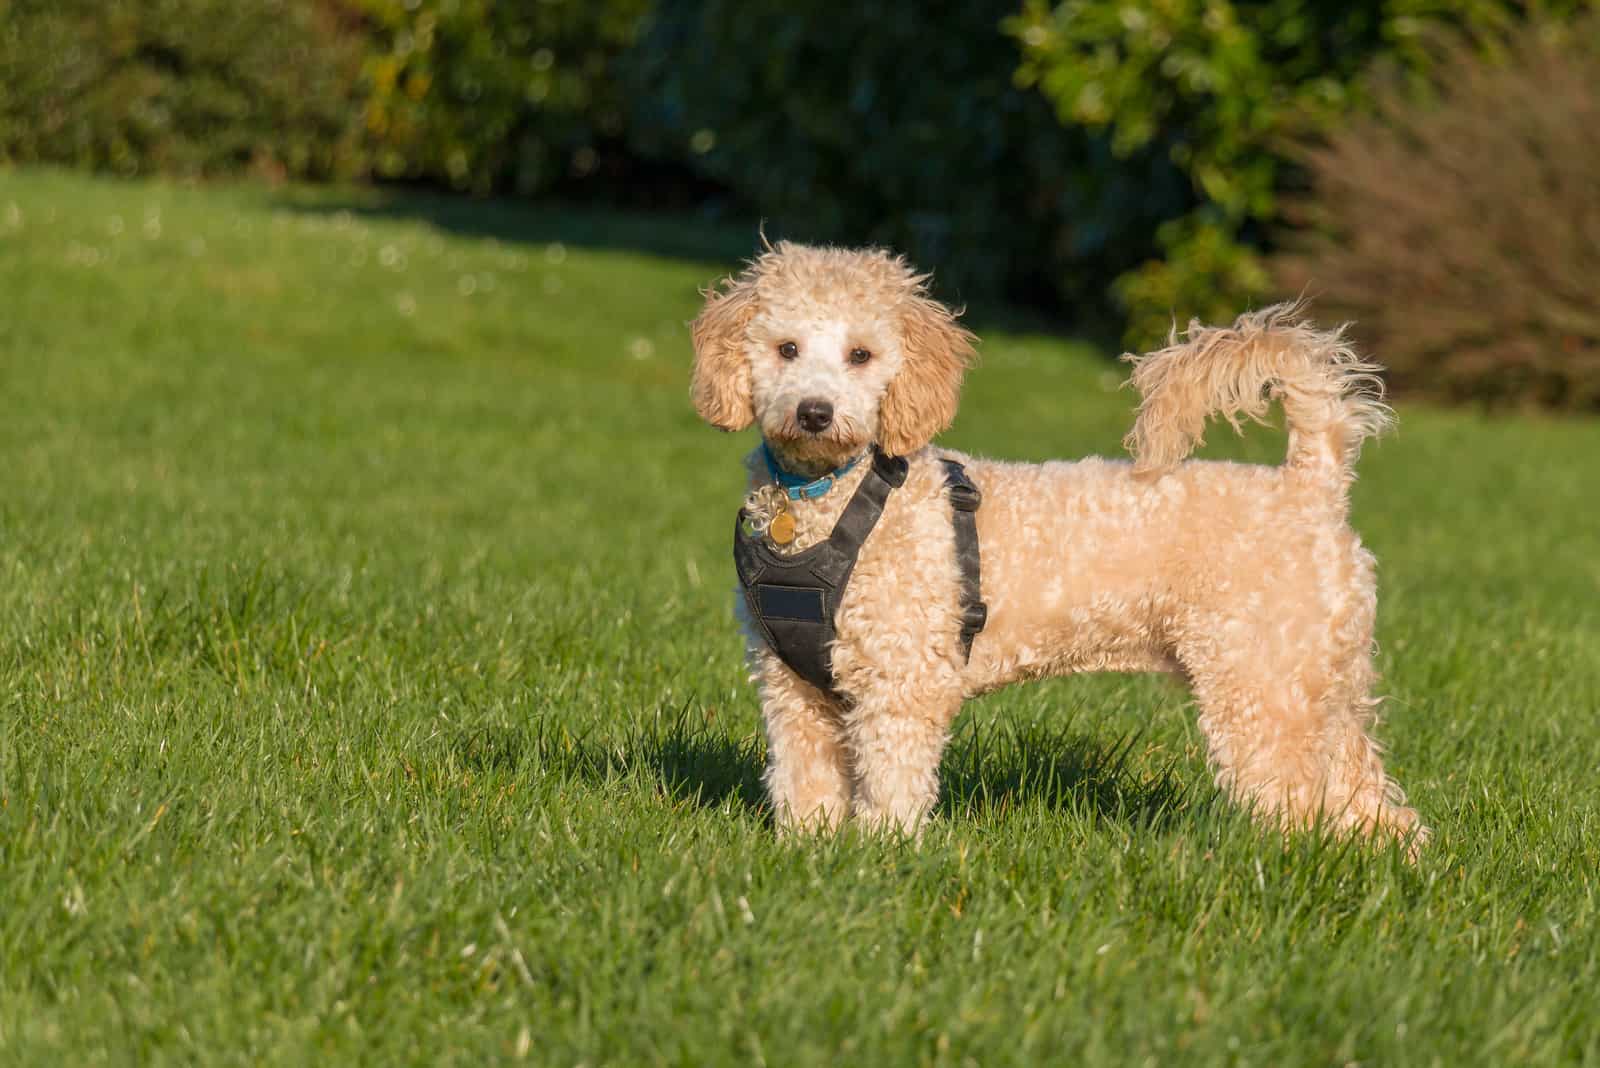 poochon puppy wearing black harness standing with tail up on green grass 